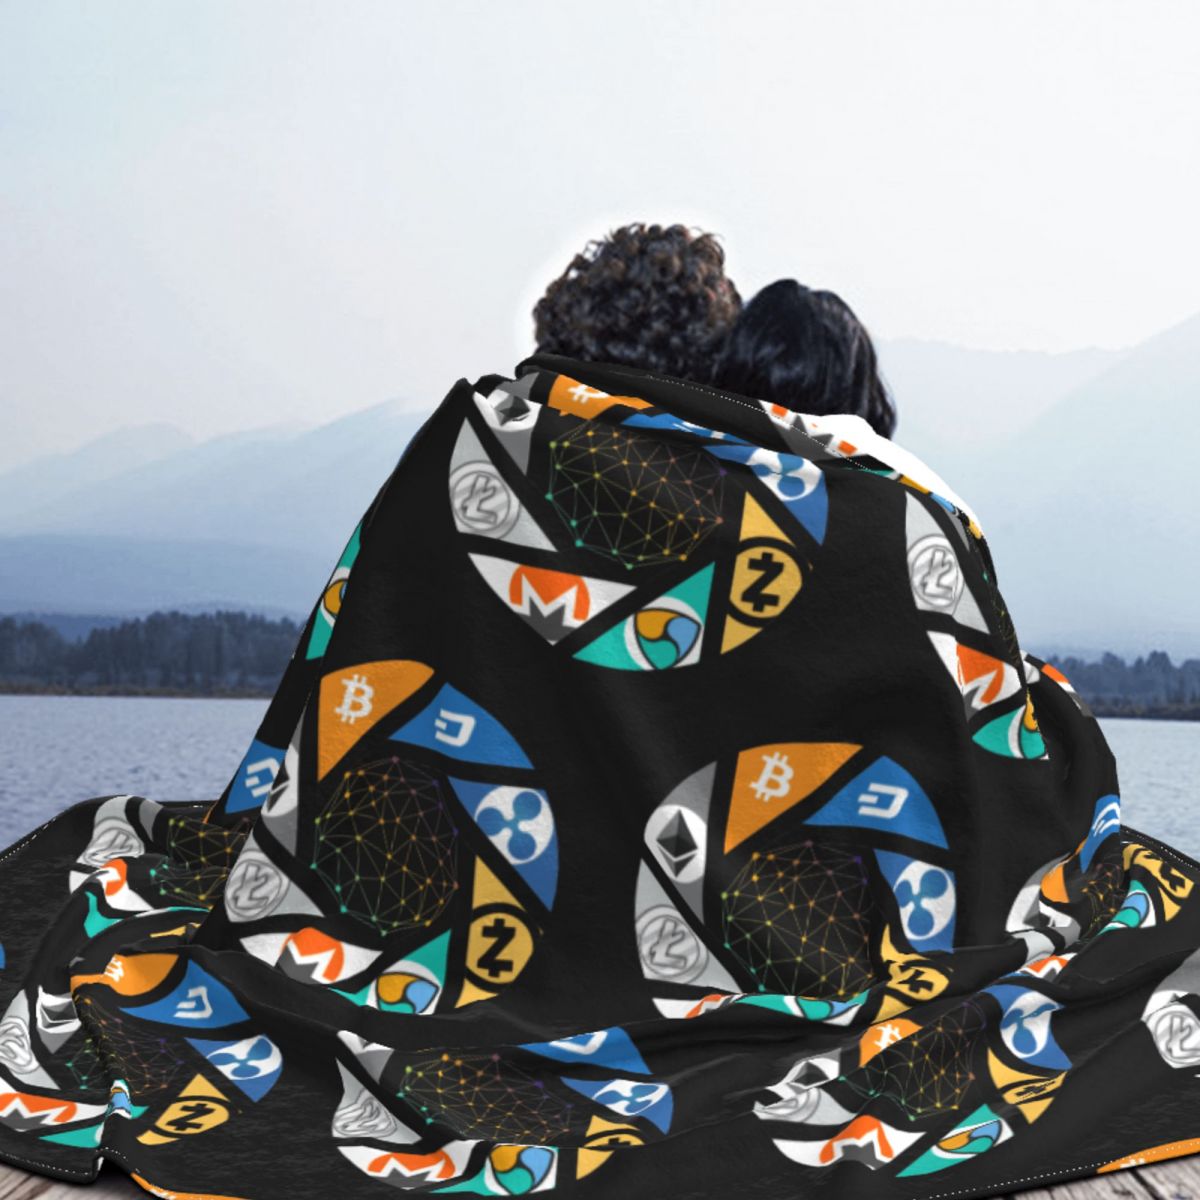 Blanket Bitcoin-themed cryptocurrency blanket